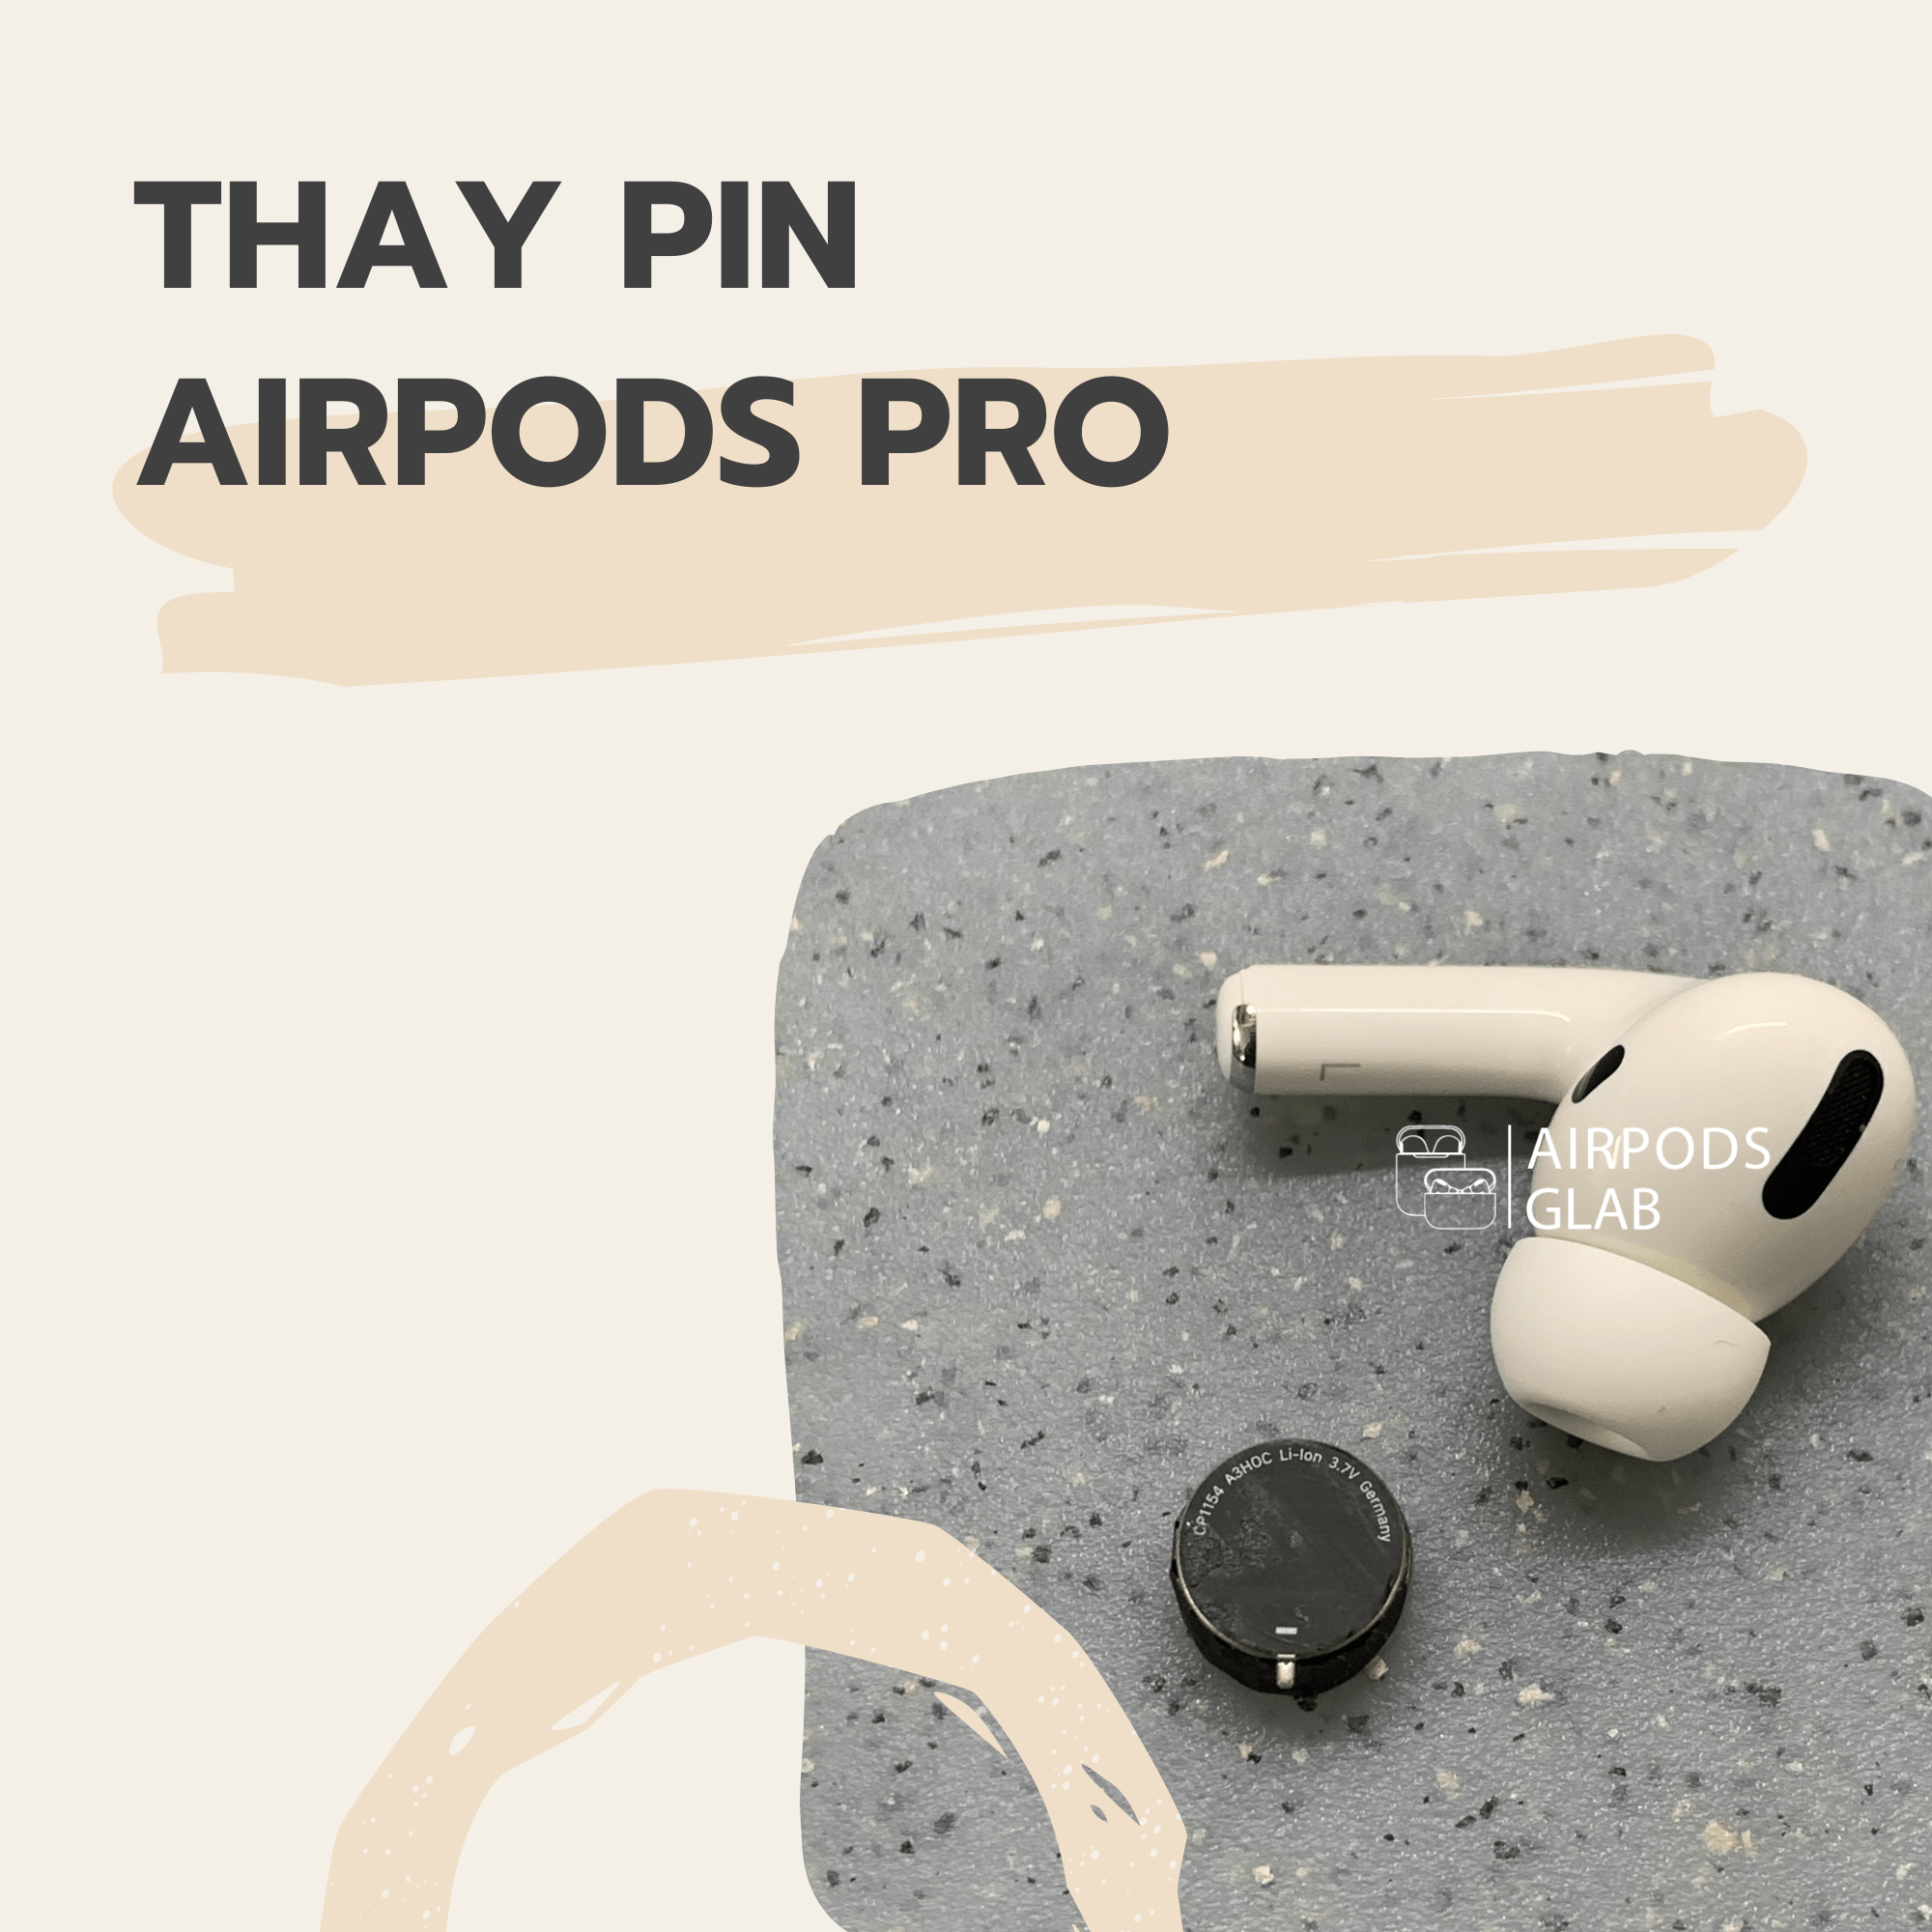 thay-pin-airpods-pro